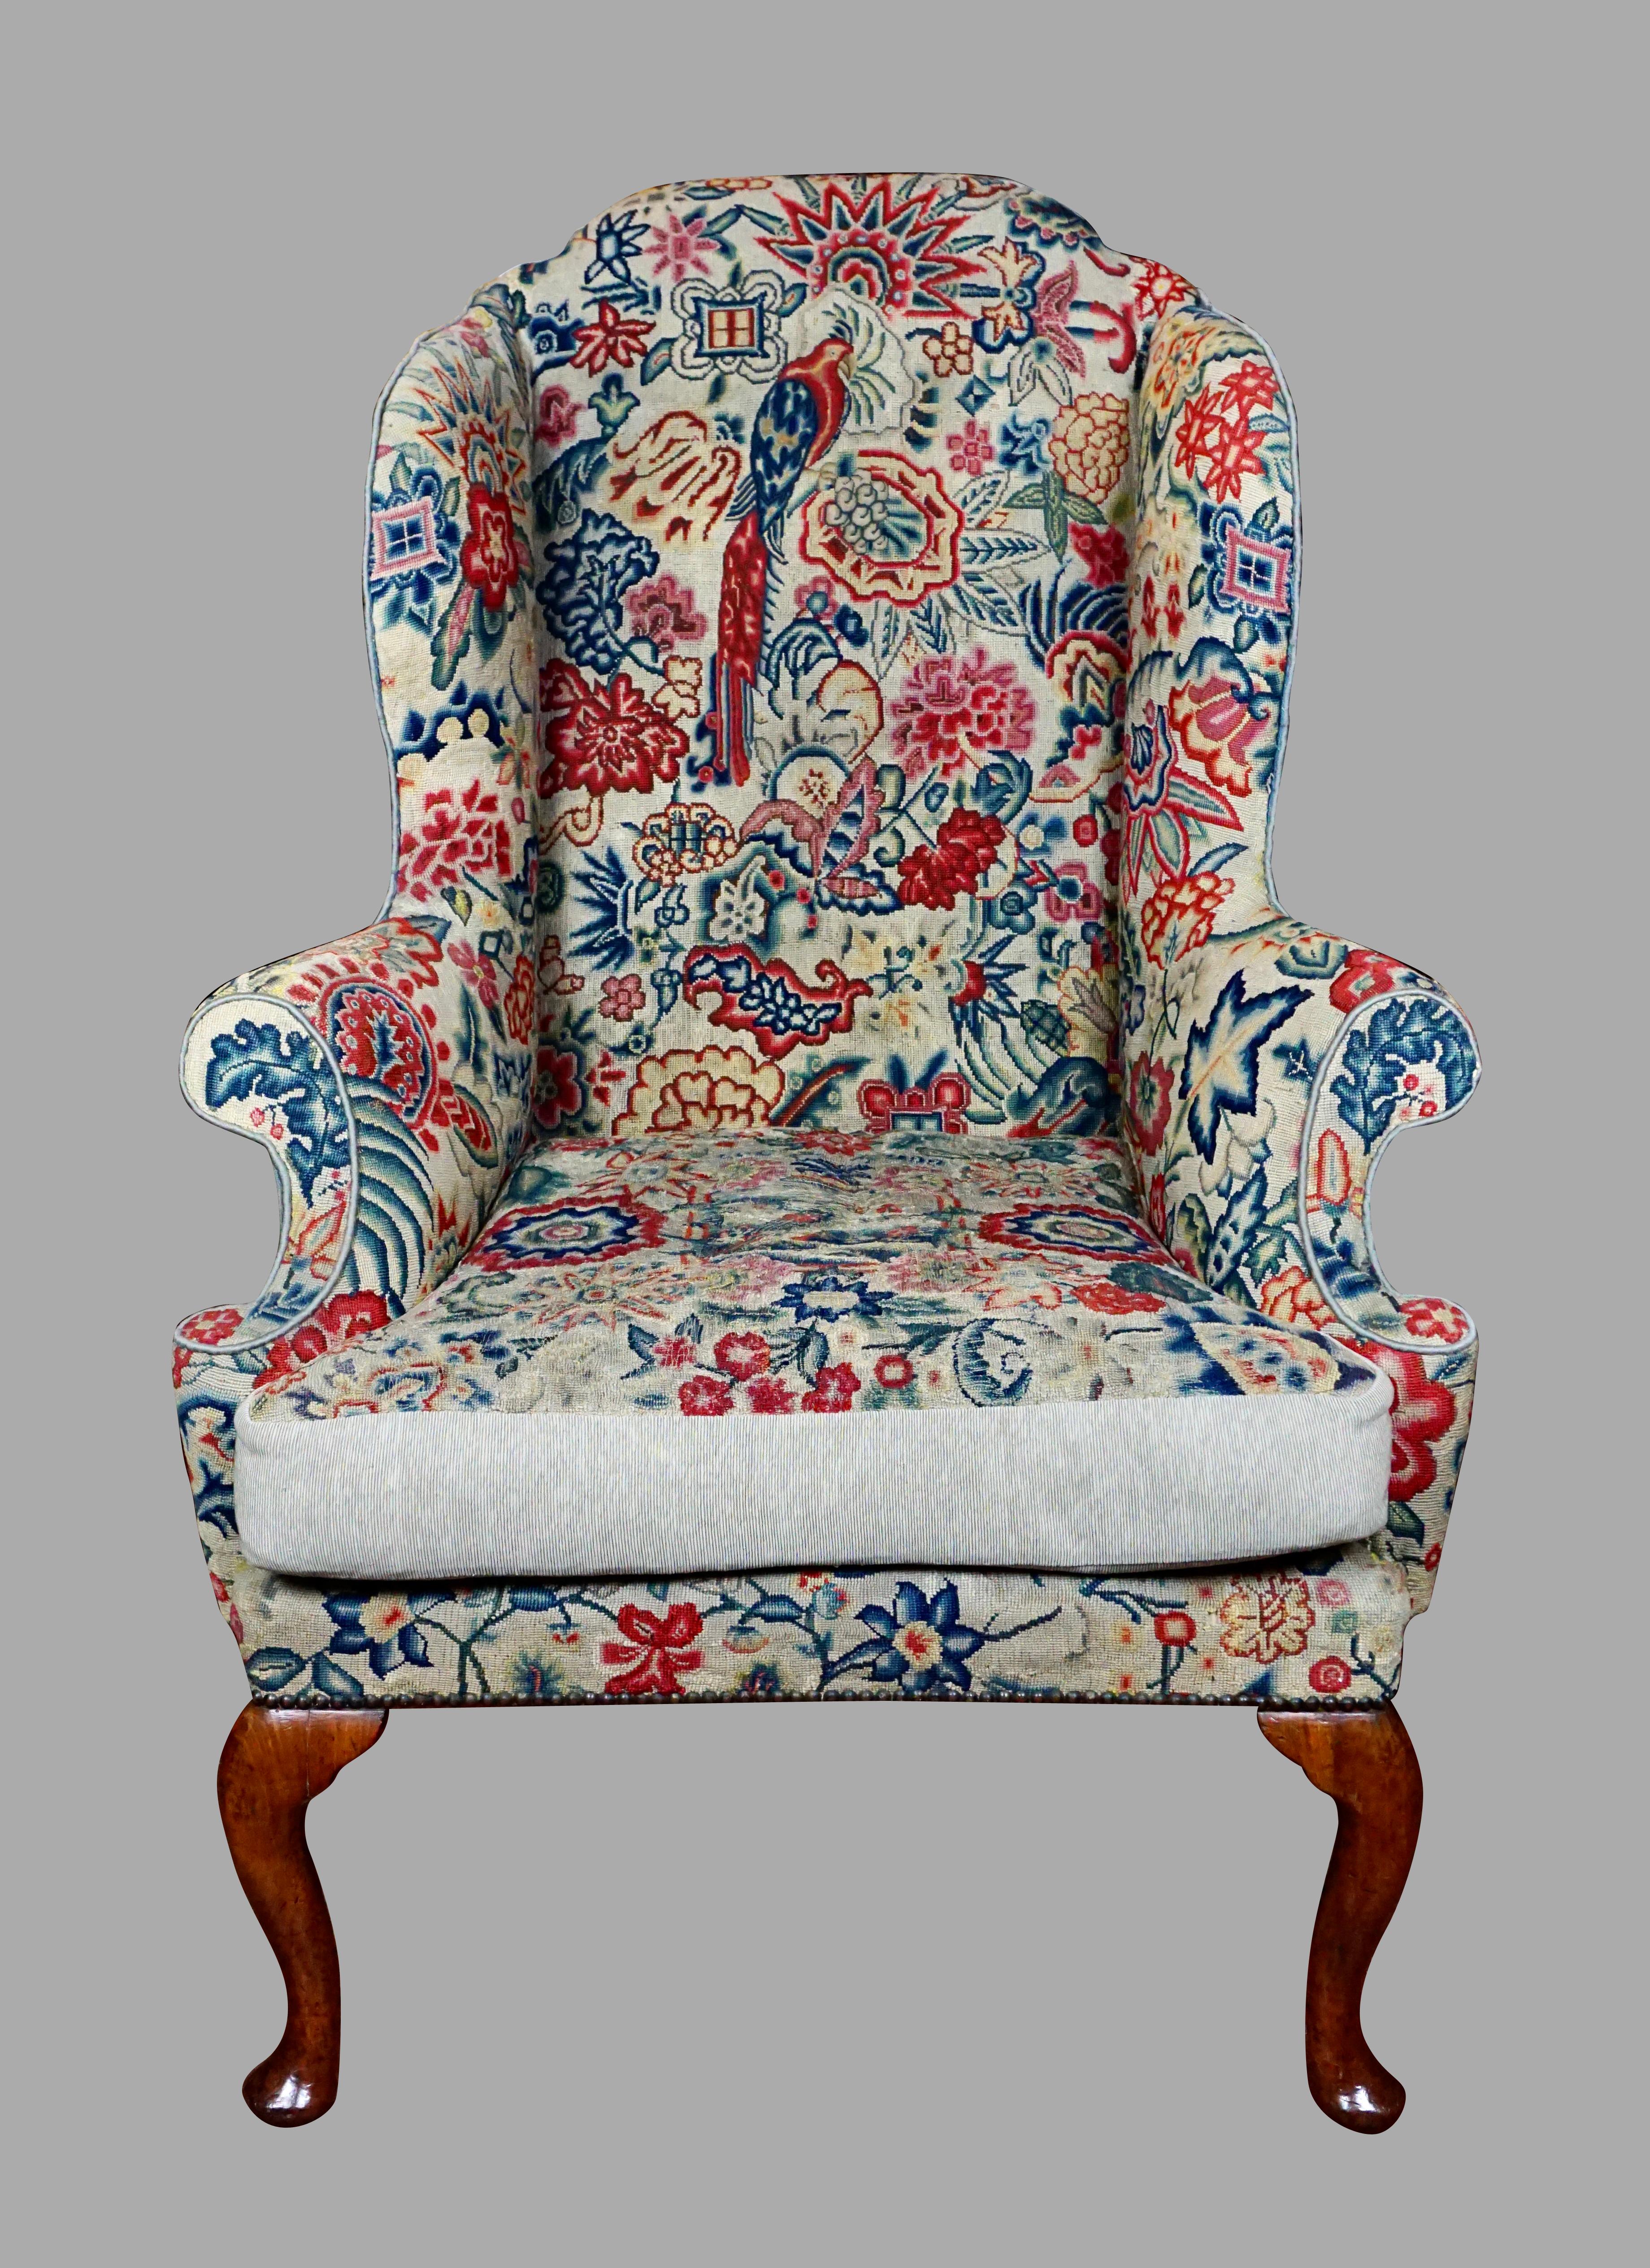 A good English George II period walnut wing armchair with cushion, upholstered in gros and petit needlepoint material, the chair dating from the early part of the 18th century. The needlepoint depicts an exotic bird in a stylized overall floral